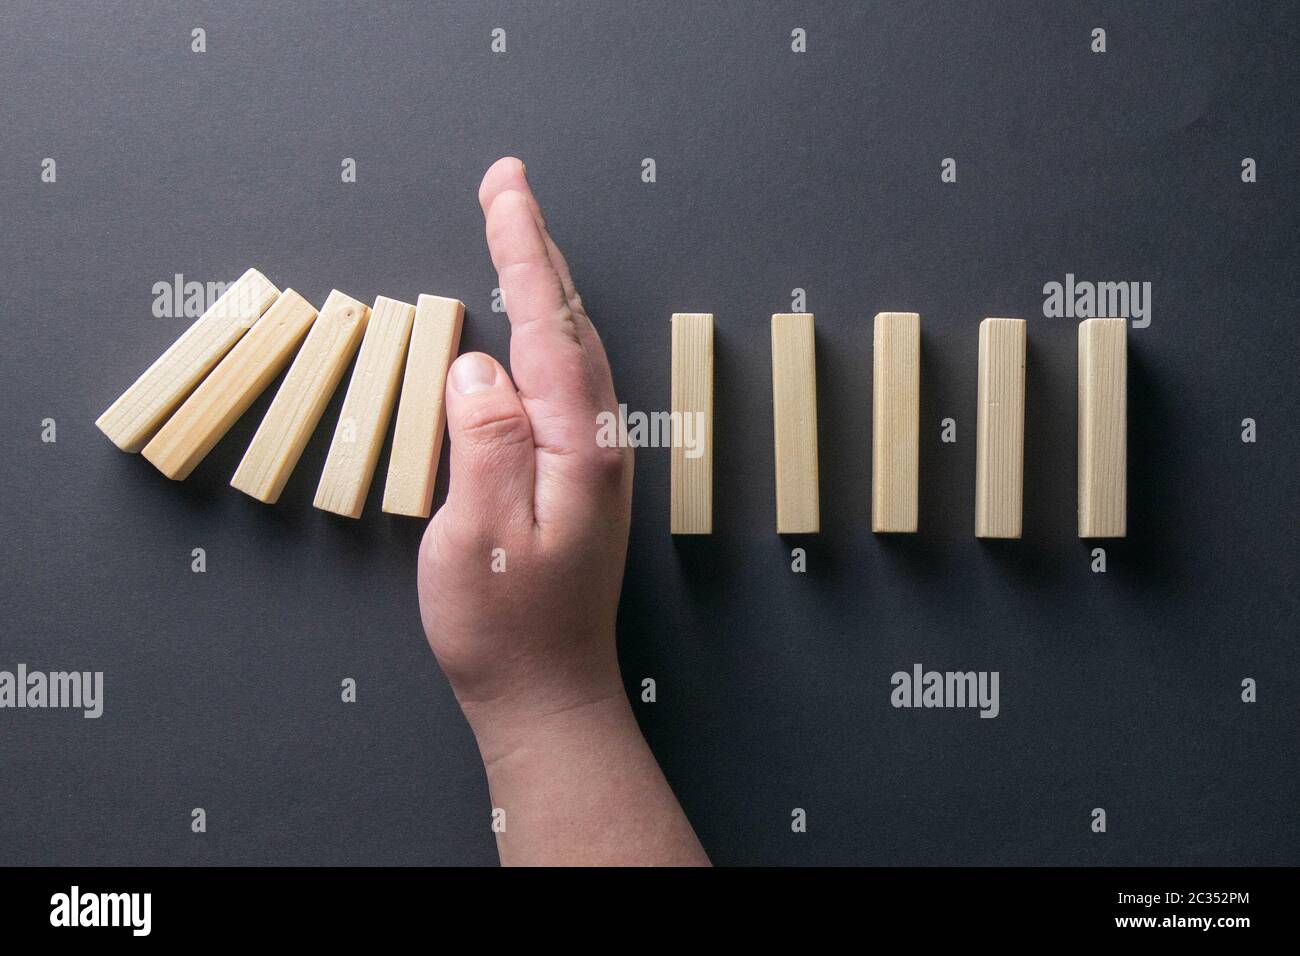 Top view man hand stopping falling dominos in a business crisis management conceptual image. Stock Photo